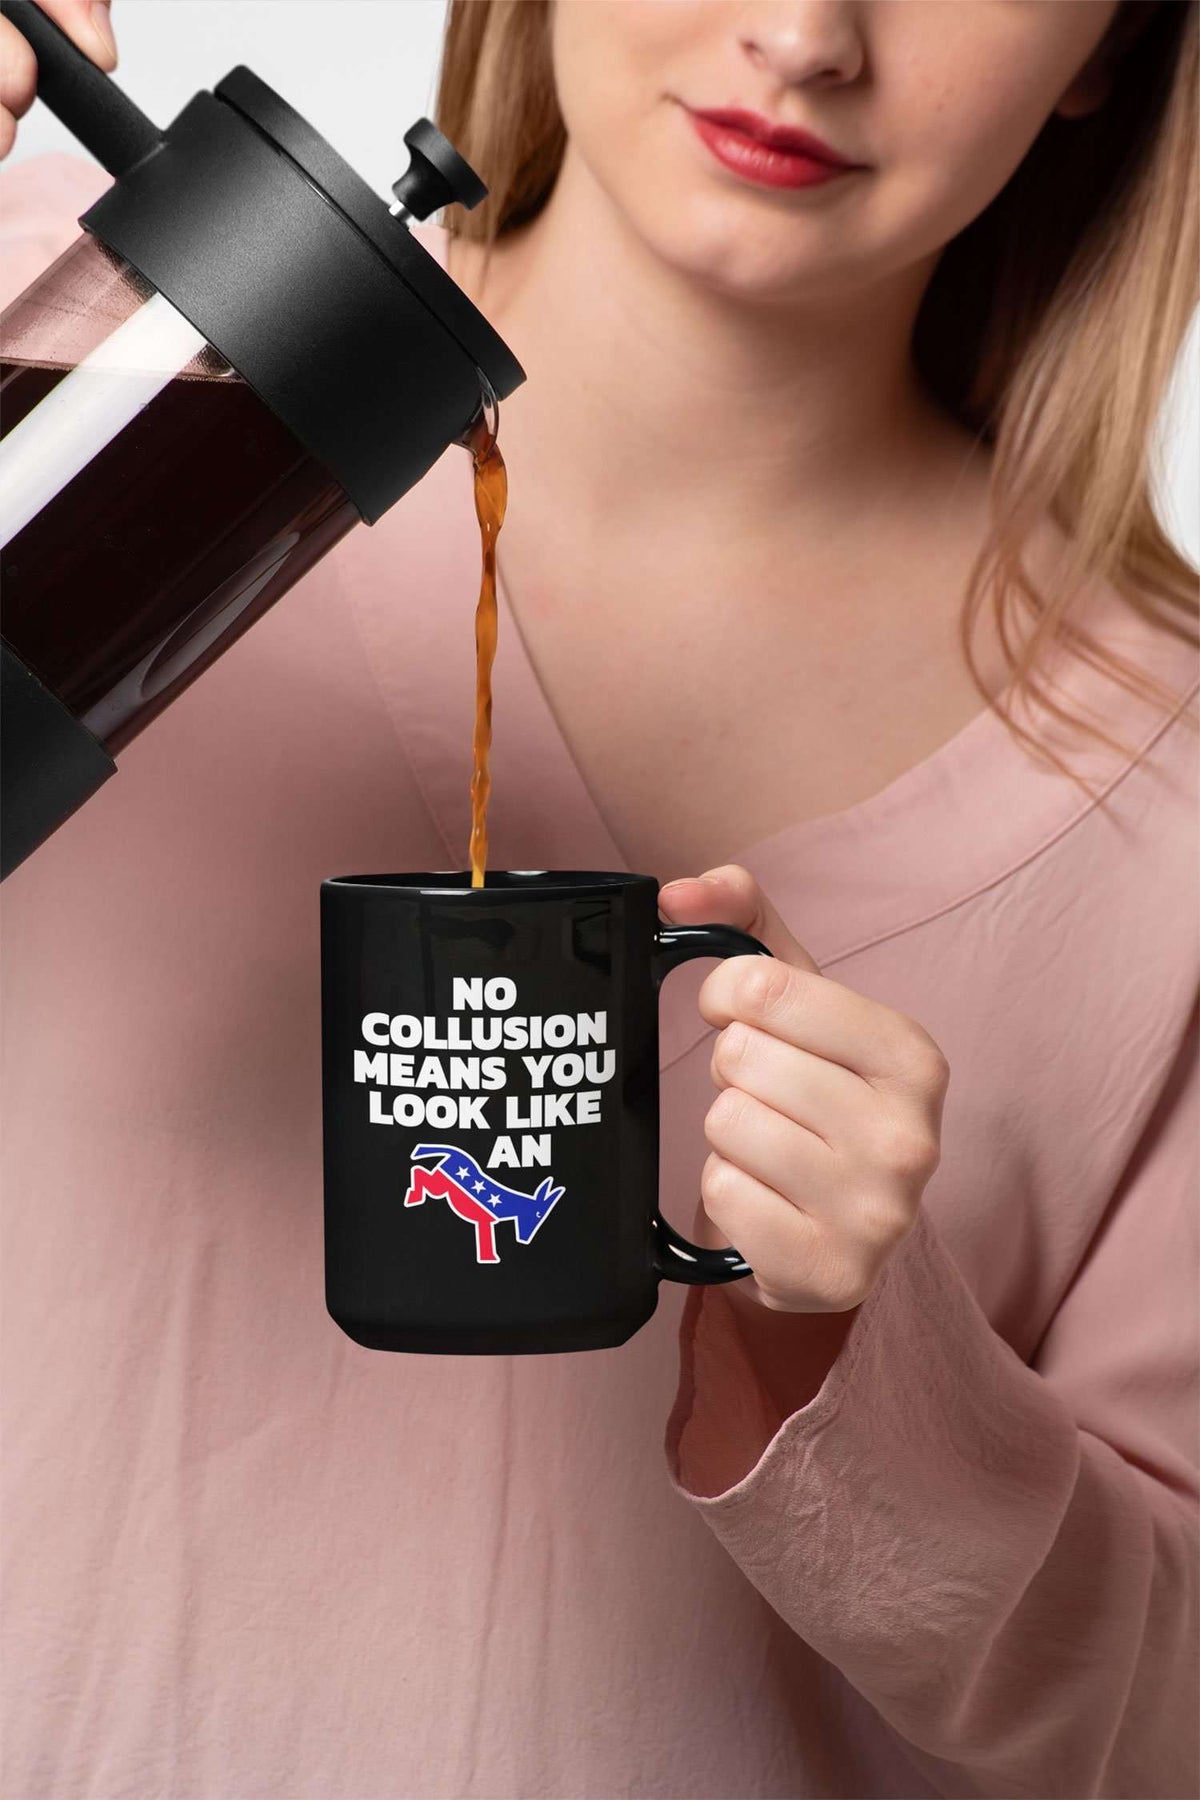 Designs by MyUtopia Shout Out:No Collusion Means Trump Humor Ceramic Coffee Mug